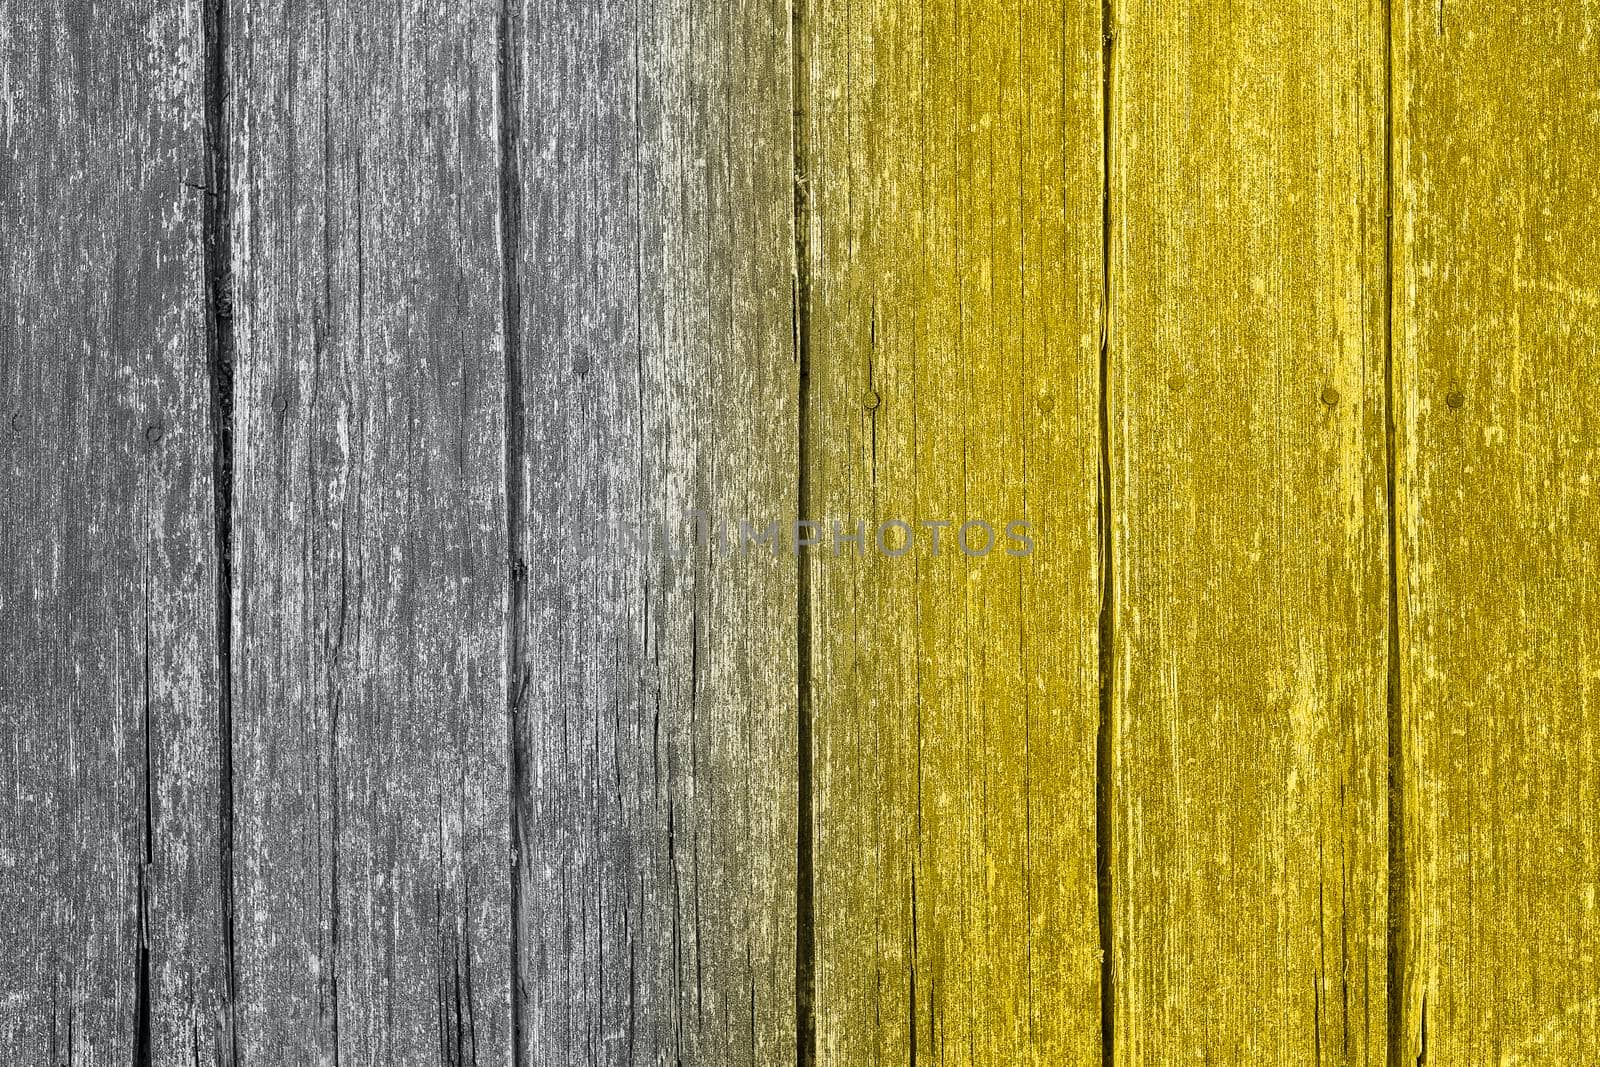 Gradient Ultimate Gray and Illuminating yellow wooden surface toned in trendy colors of 2021. Wood background